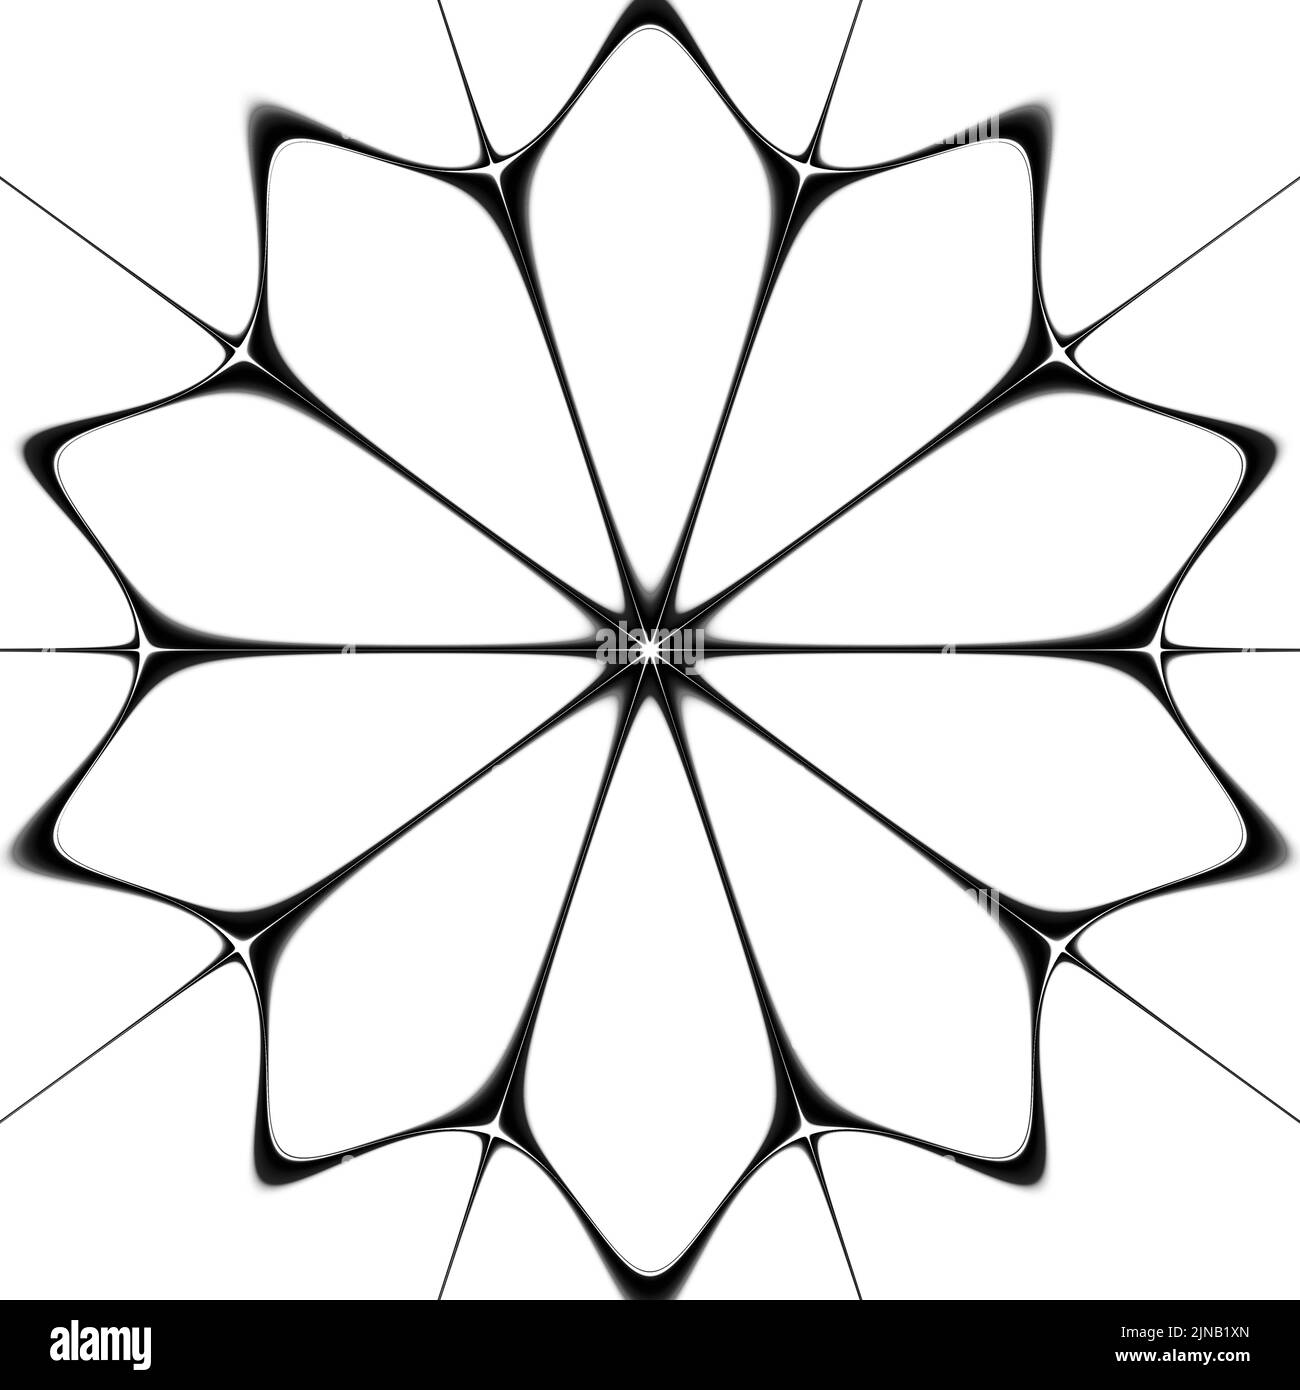 floral digital abstraction, black ink on white Stock Photo